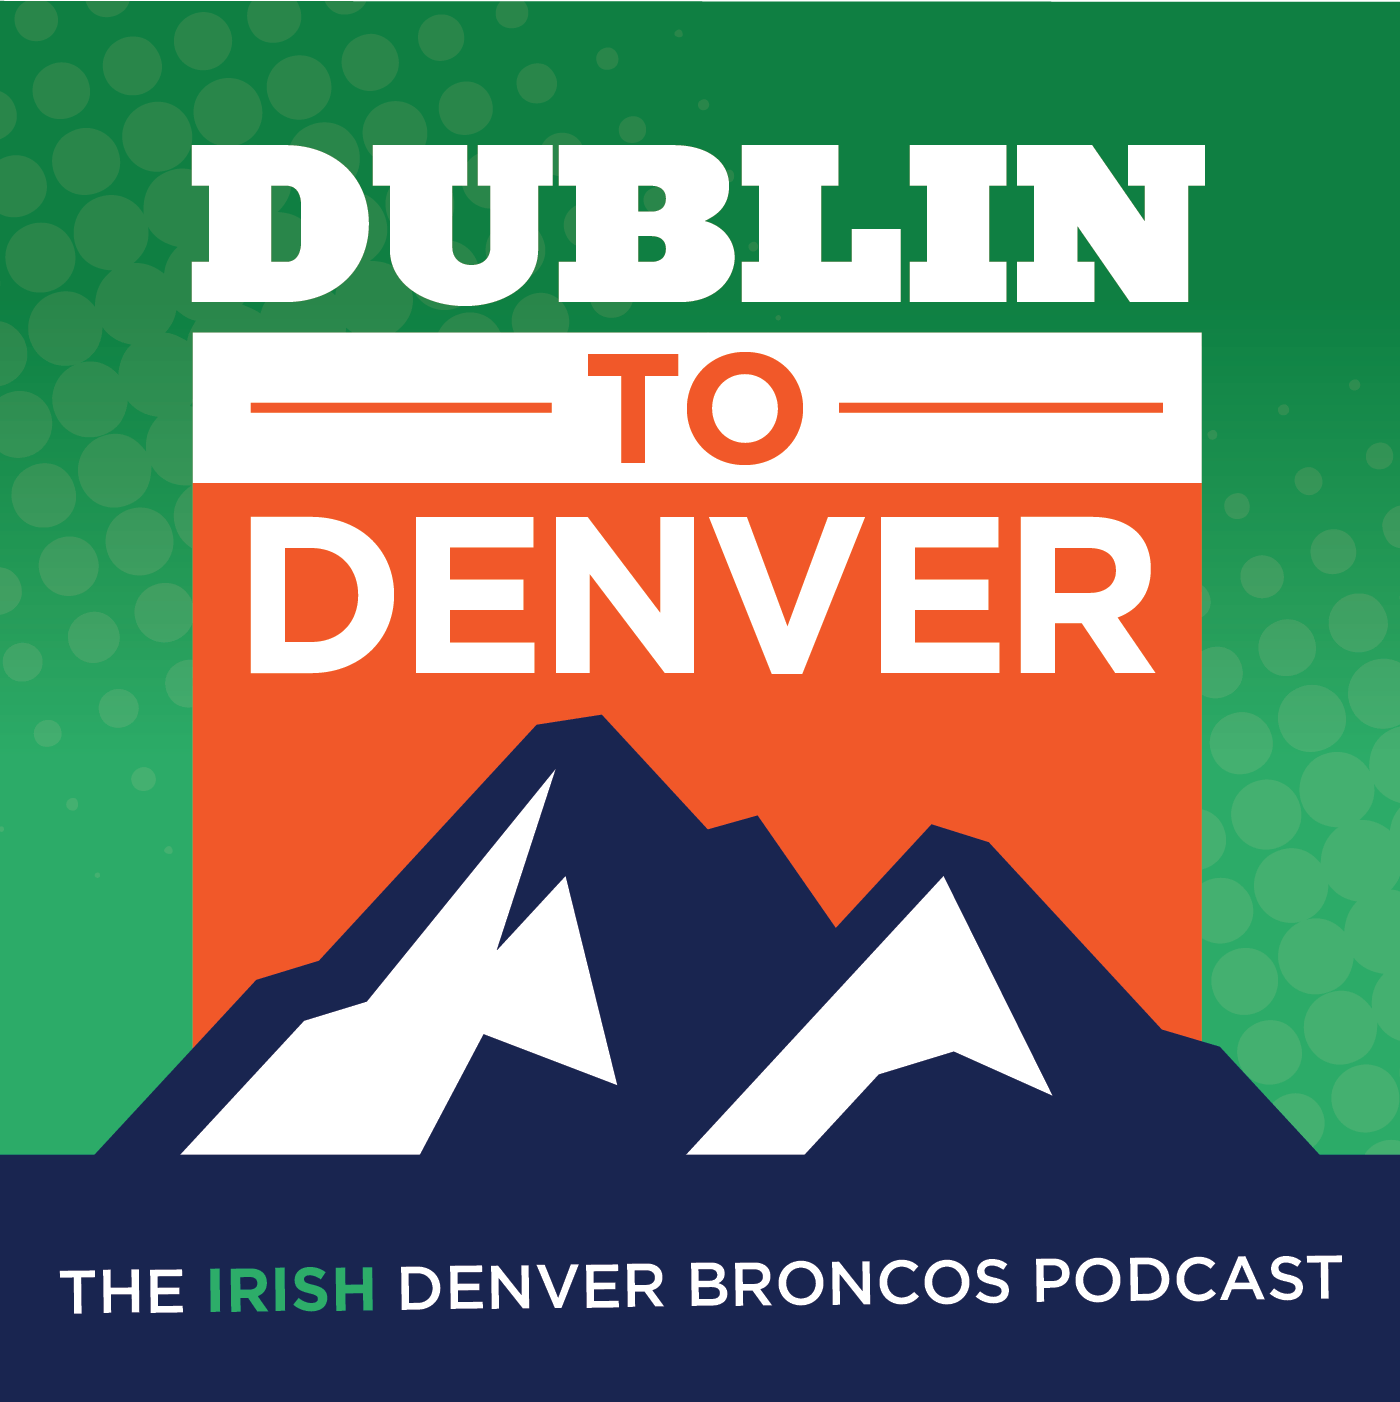 Dublin to Denver - What is the floor and ceiling for Bo Nix?